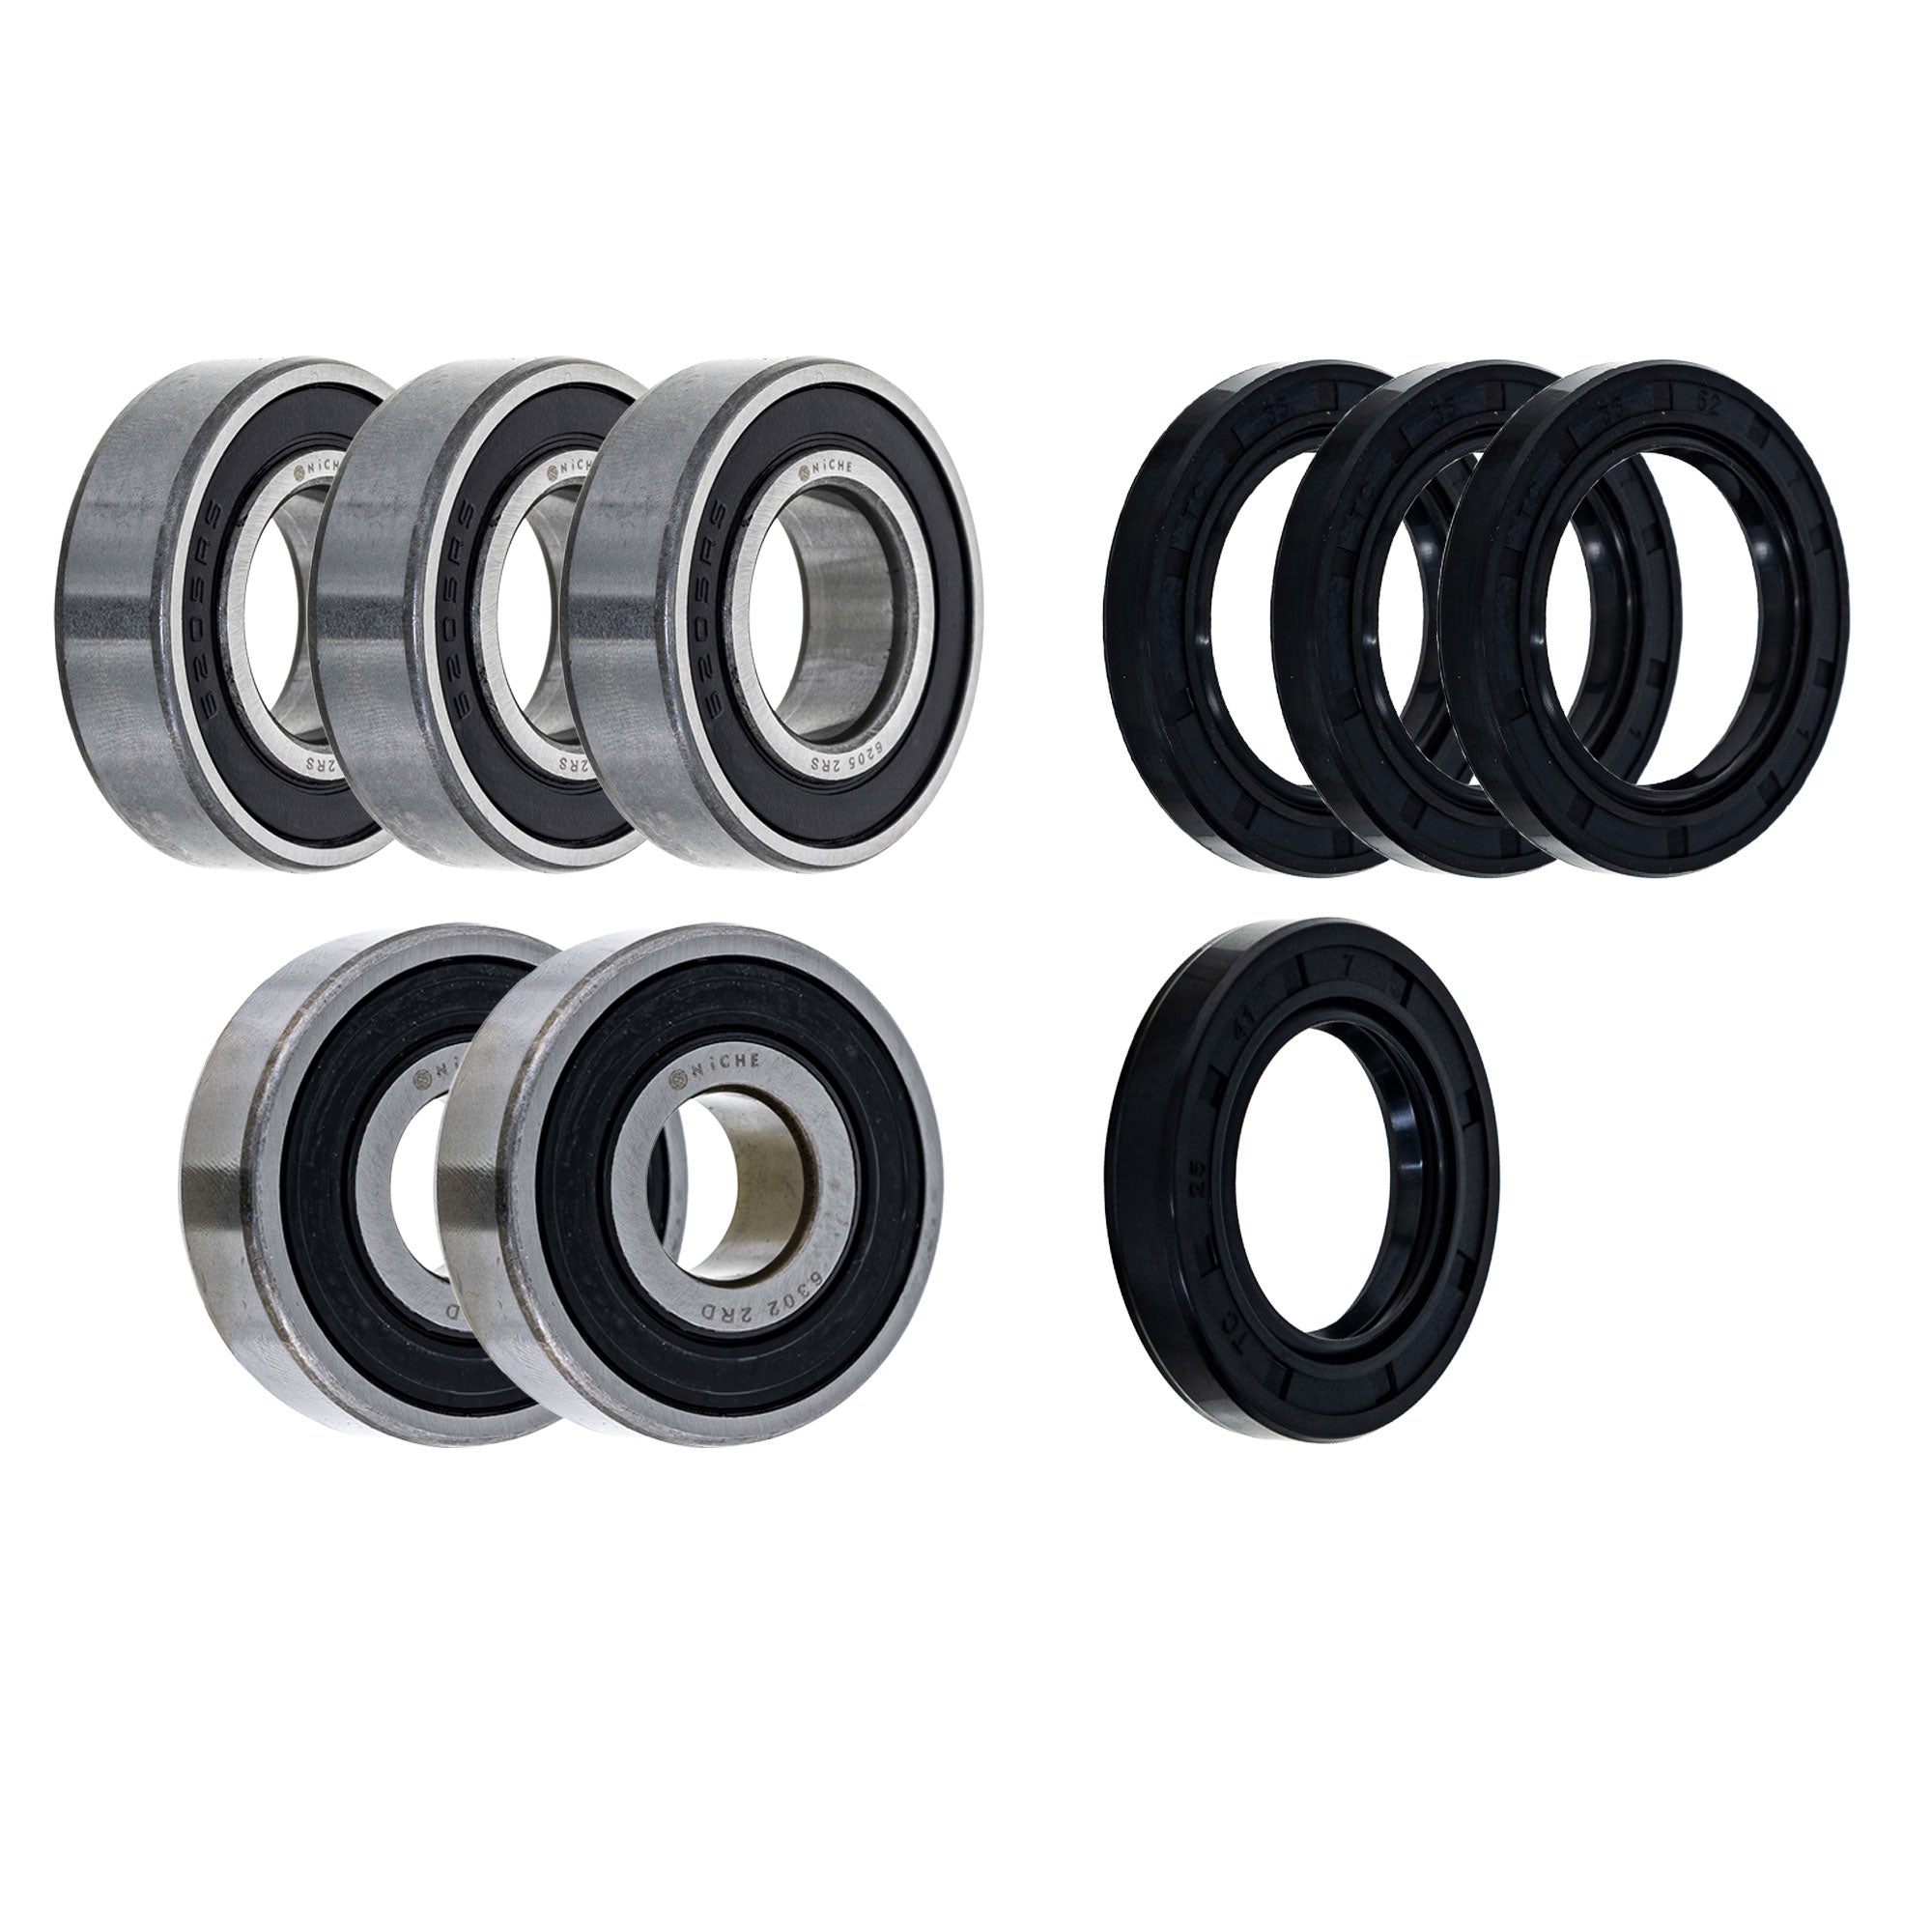 Wheel Bearing Seal Kit for zOTHER Ref No KH400 NICHE MK1008528